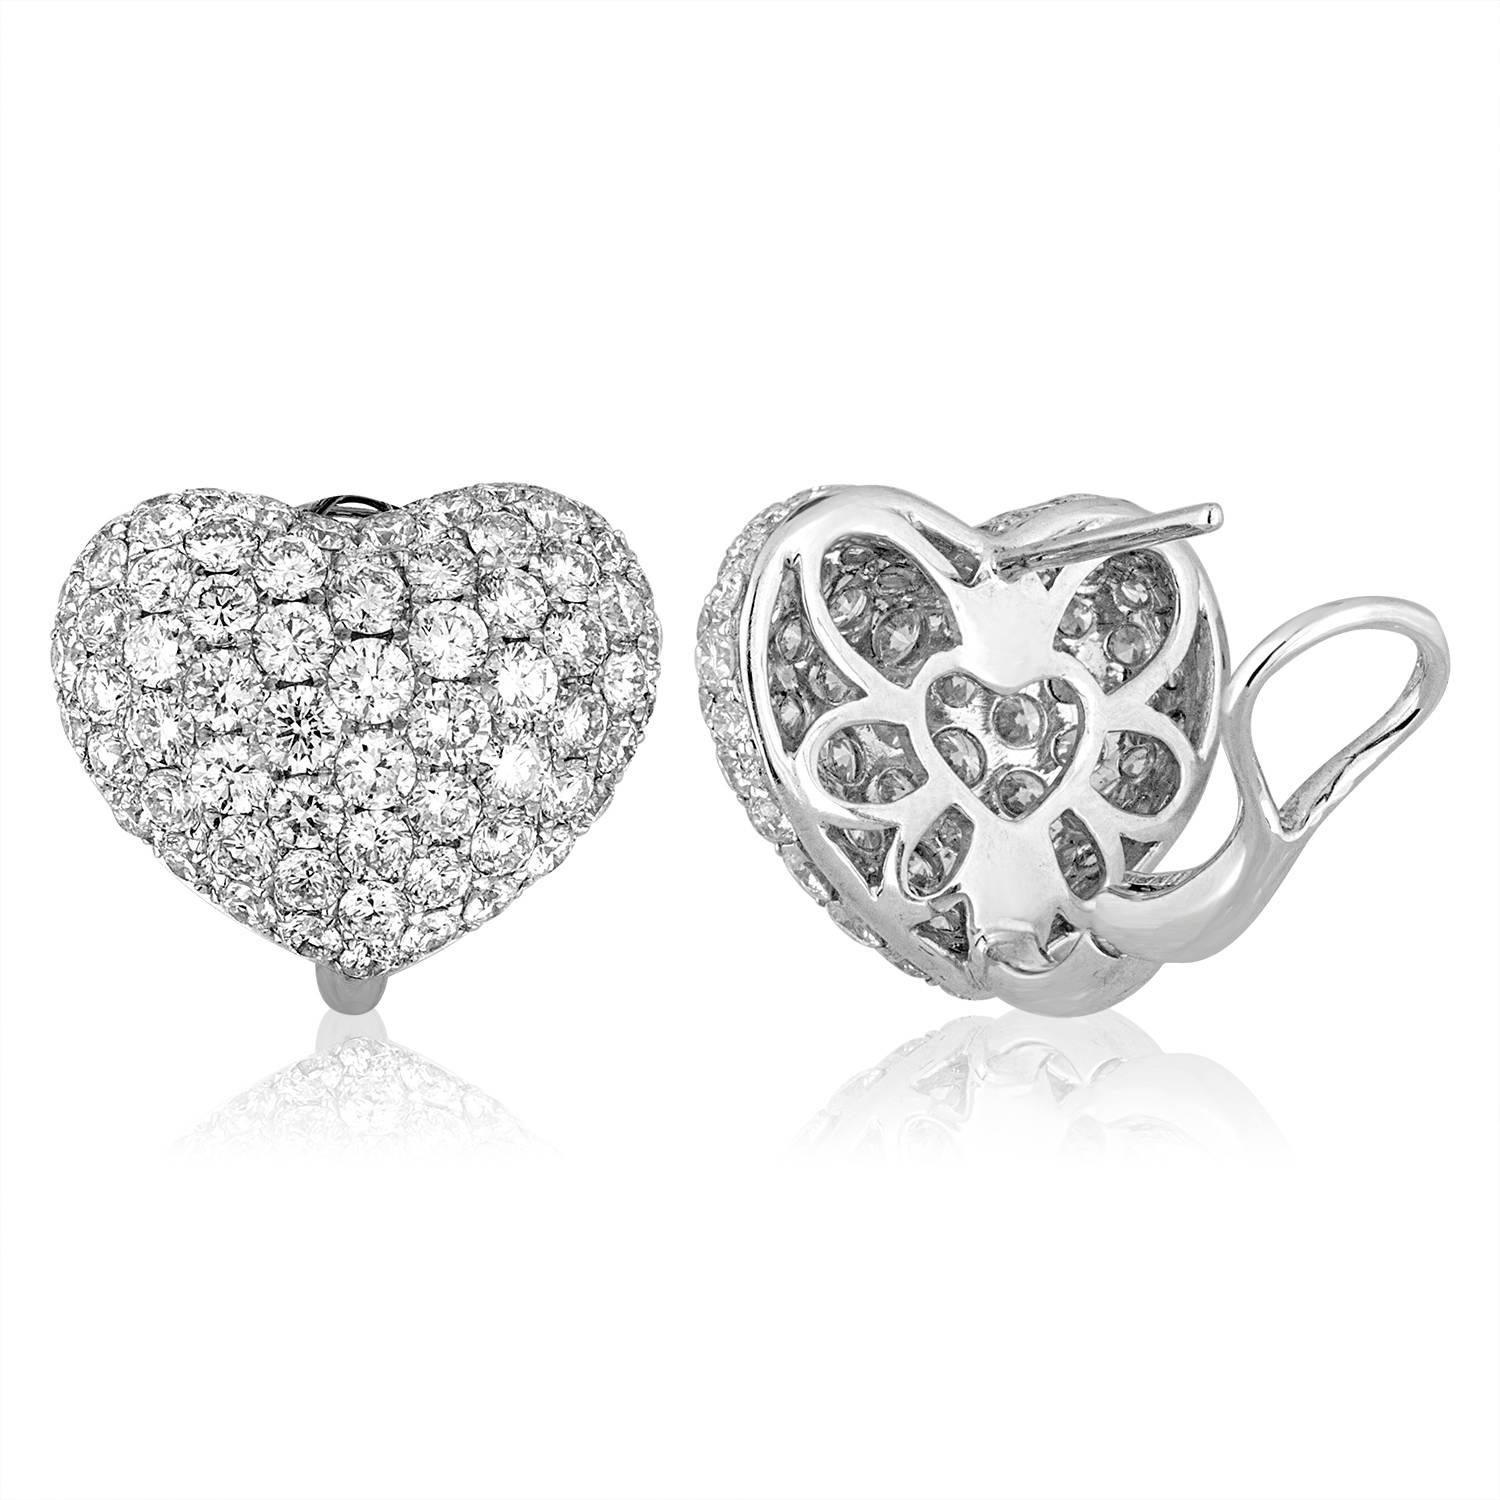 The heart pave earrings
The earrings are 18K White Gold
There are 4.62 Carats in Diamonds F/G VS/SI
The earrings measure 10/16